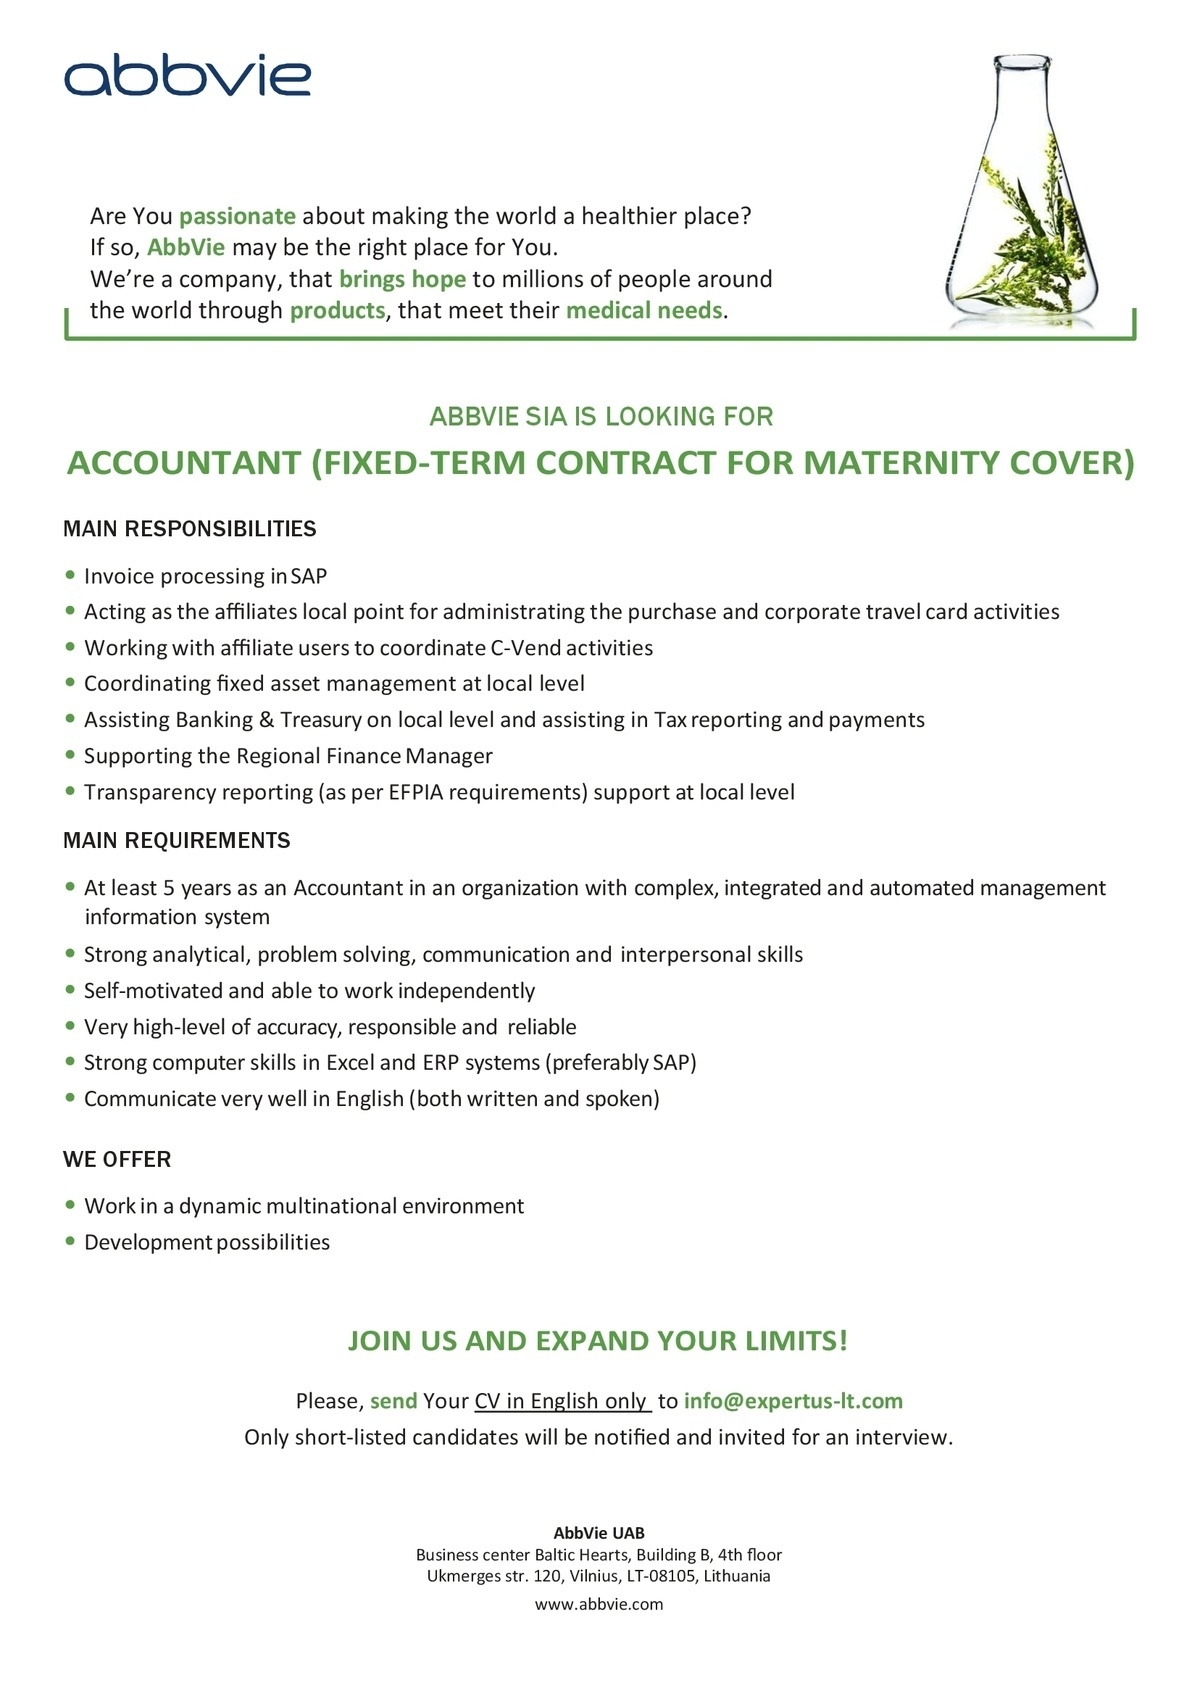 Expertus LT, UAB ACCOUNTANT (FIXED-TERM CONTRACT FOR MATERNITY COVER)